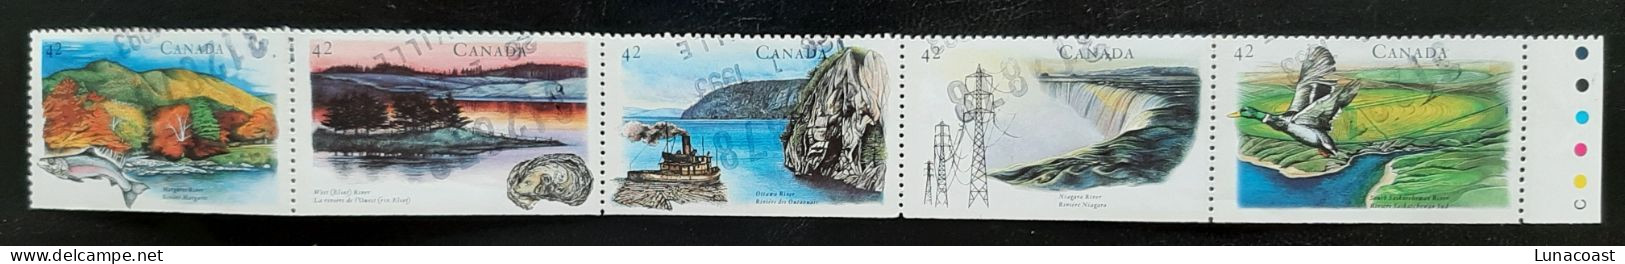 Canada 1992  USED  Sc1412a    Hor. Strip Of  5 X 42c  Heritage Rivers - 2 - Used Stamps